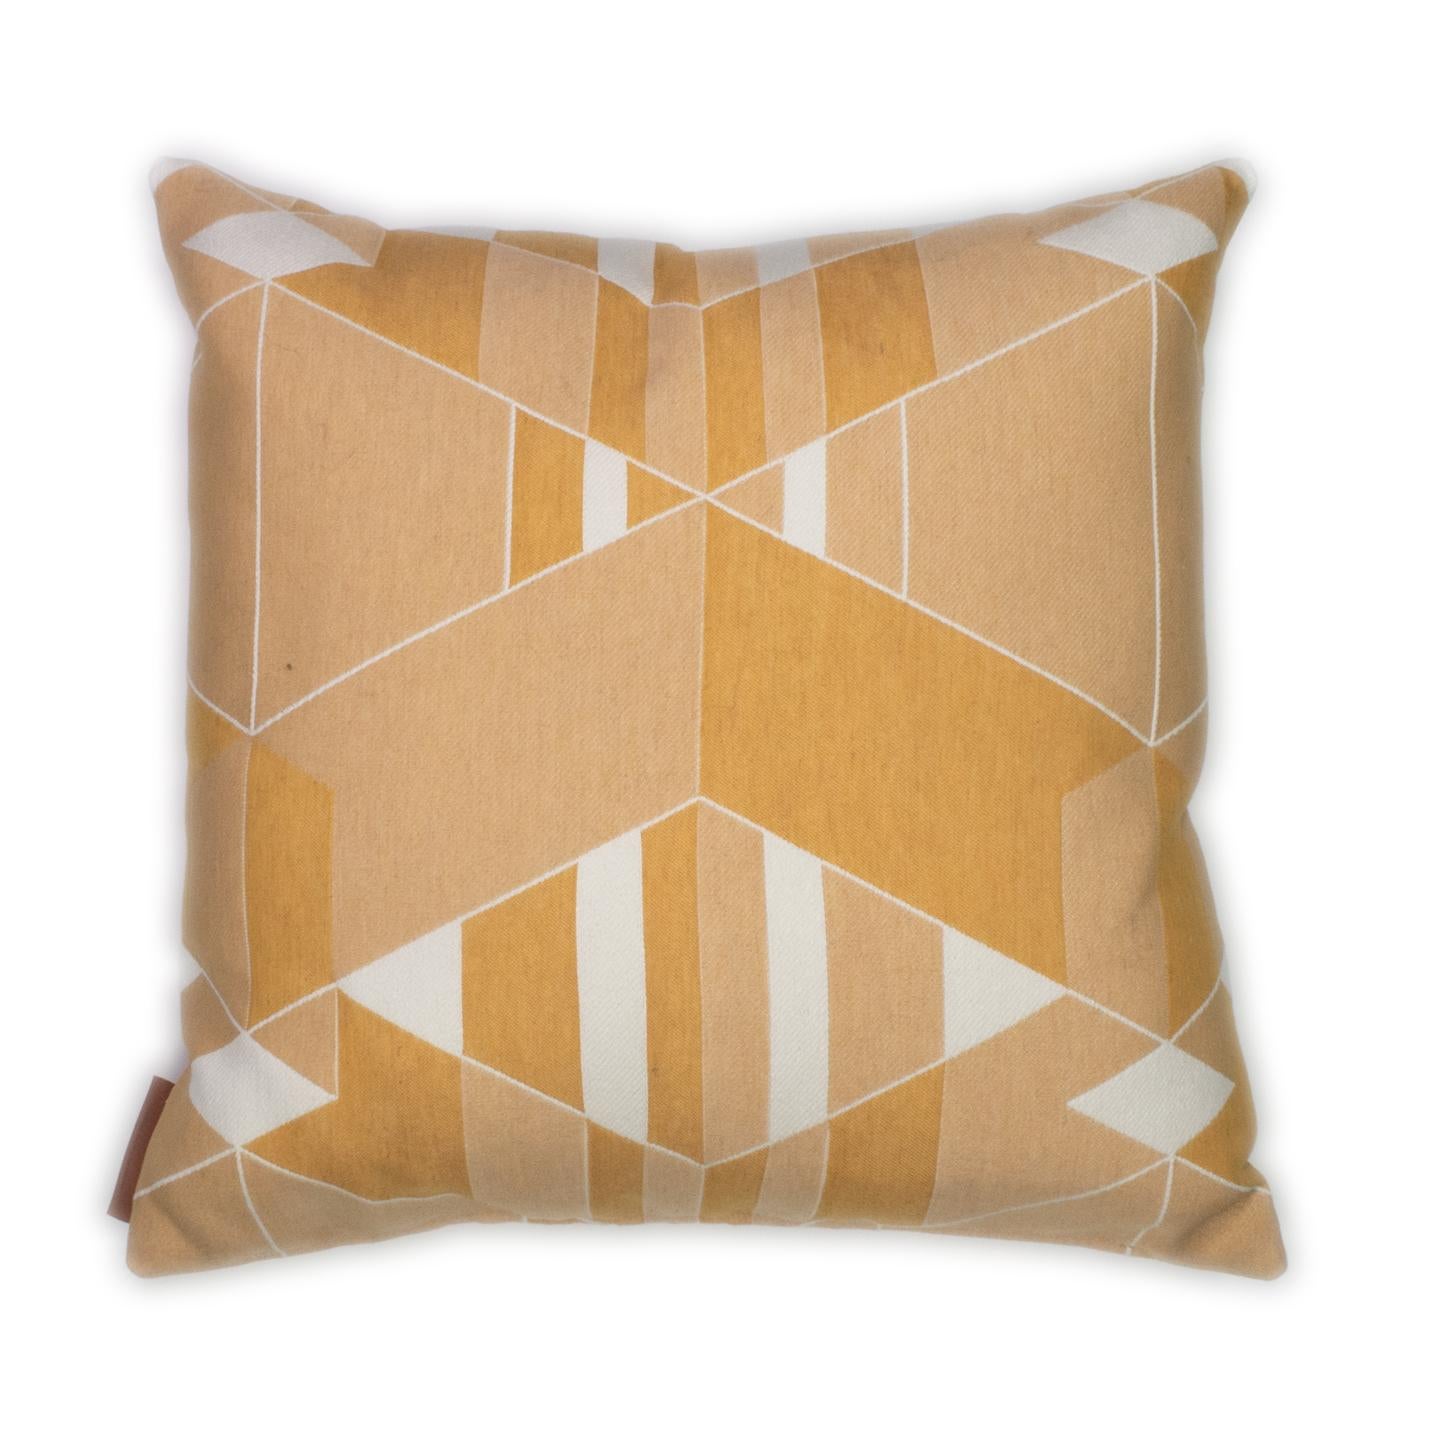 Modern Cushion / Pattern Cushion Absolute Coup De Foudre Gold Reverse by Evolution21 For Sale